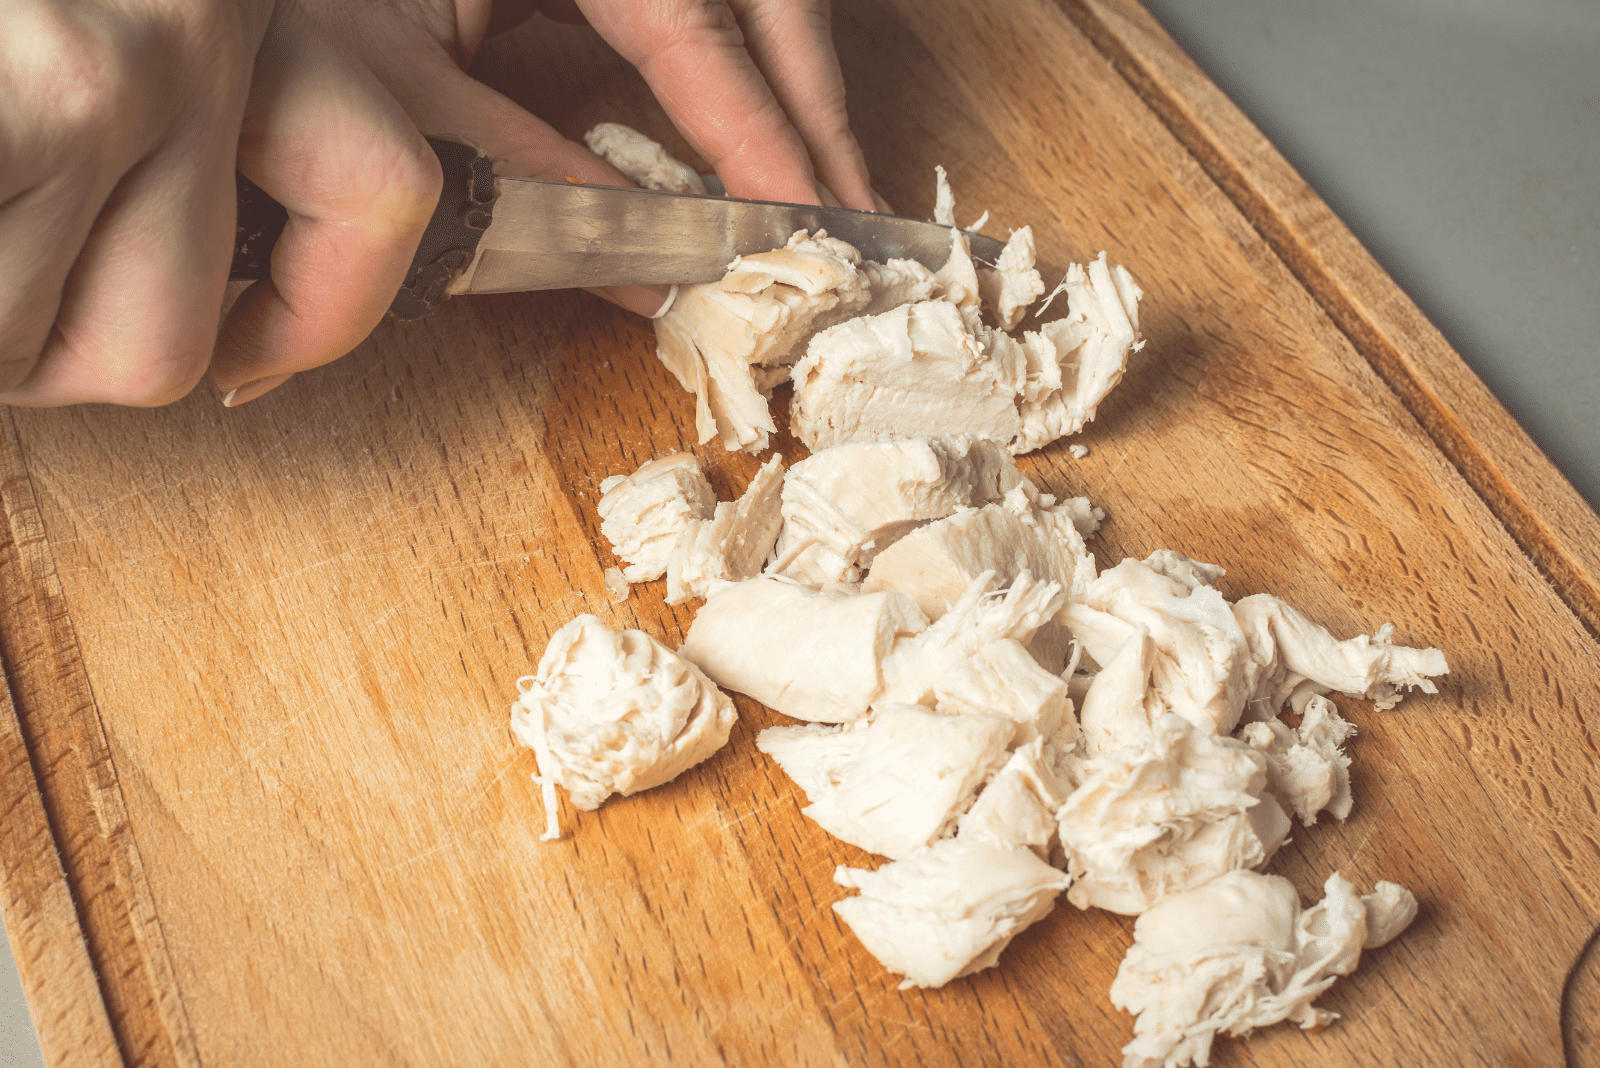 the woman cuts the boiled chicken